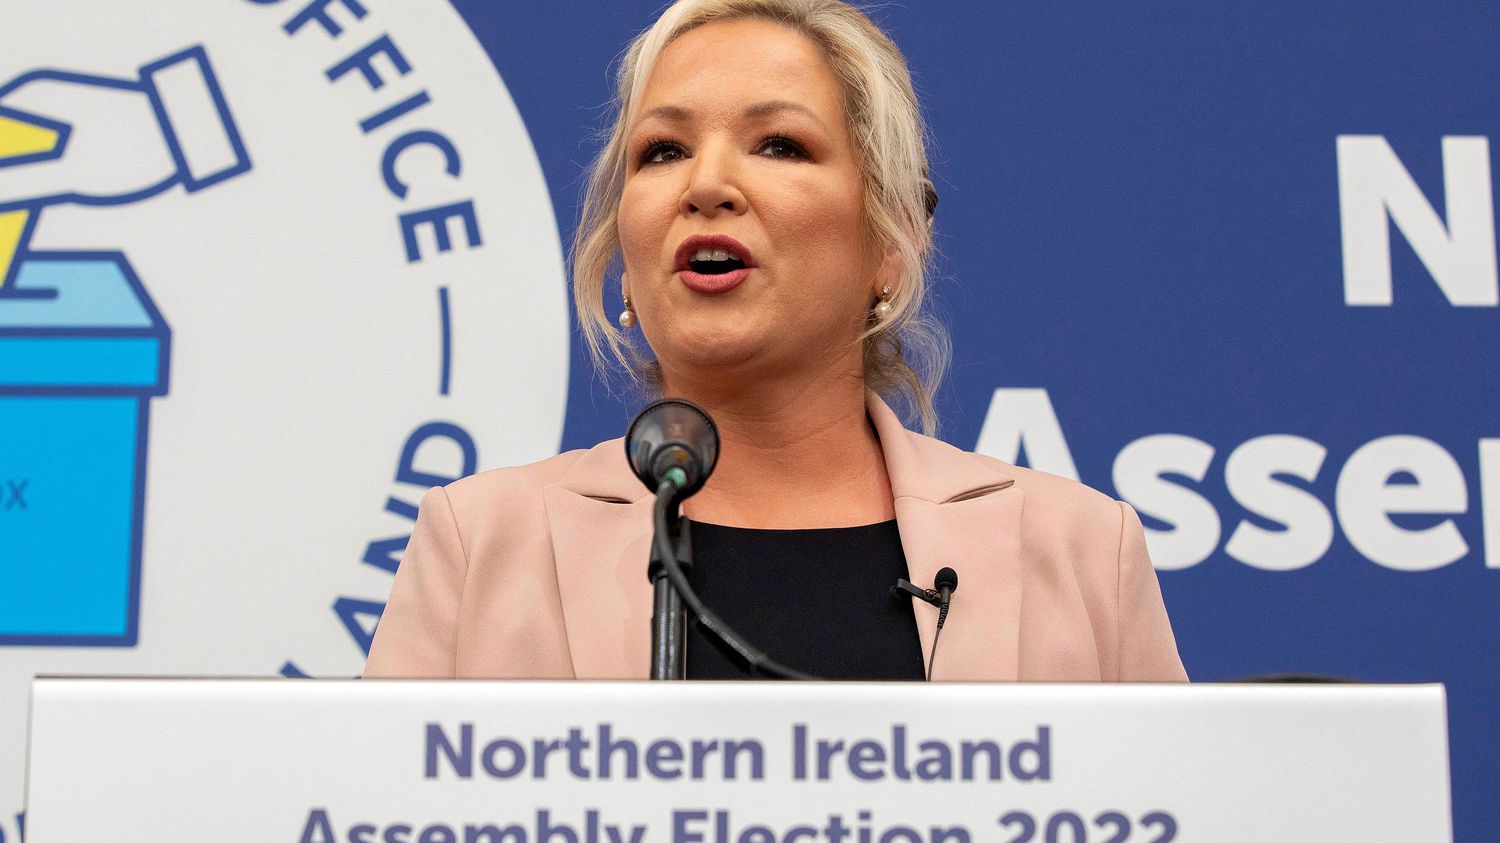 Northern Ireland: Unionists recognize victory for Sinn Fein, which hails 